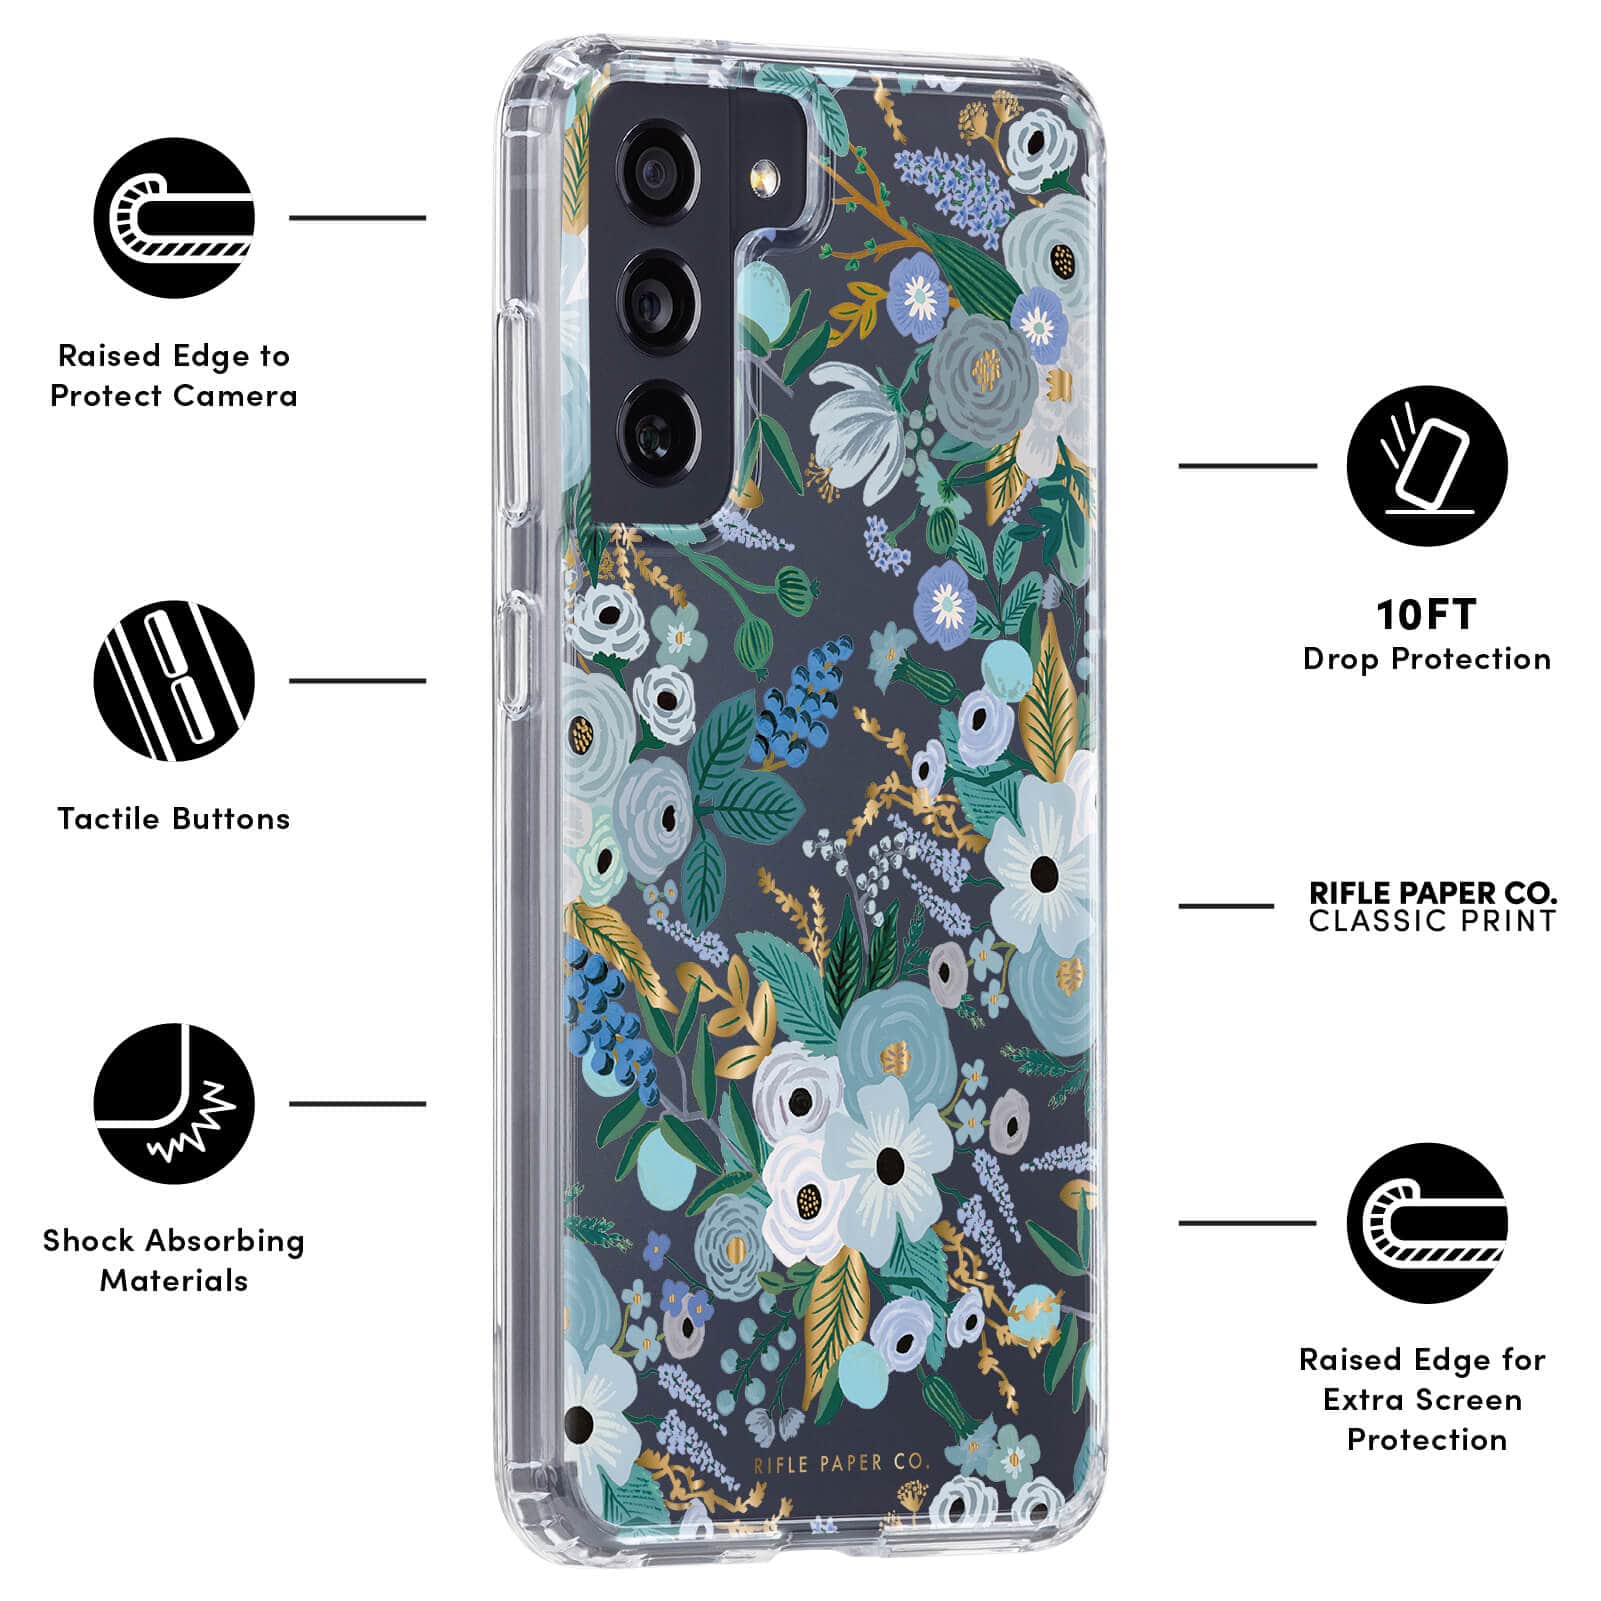 FEATURES: RAISED EDGE TO PROTECT CAMERA, TACTILE BUTTONS, SHOCK ABSORBING MATERIALS, 10FT DROP PROTECTION, RIFLE PAPER CO. CLASSIC PRINT, RAISED EDGE FOR EXTRA SCREEN PROTECTION. COLOR::GARDEN PARTY BLUE